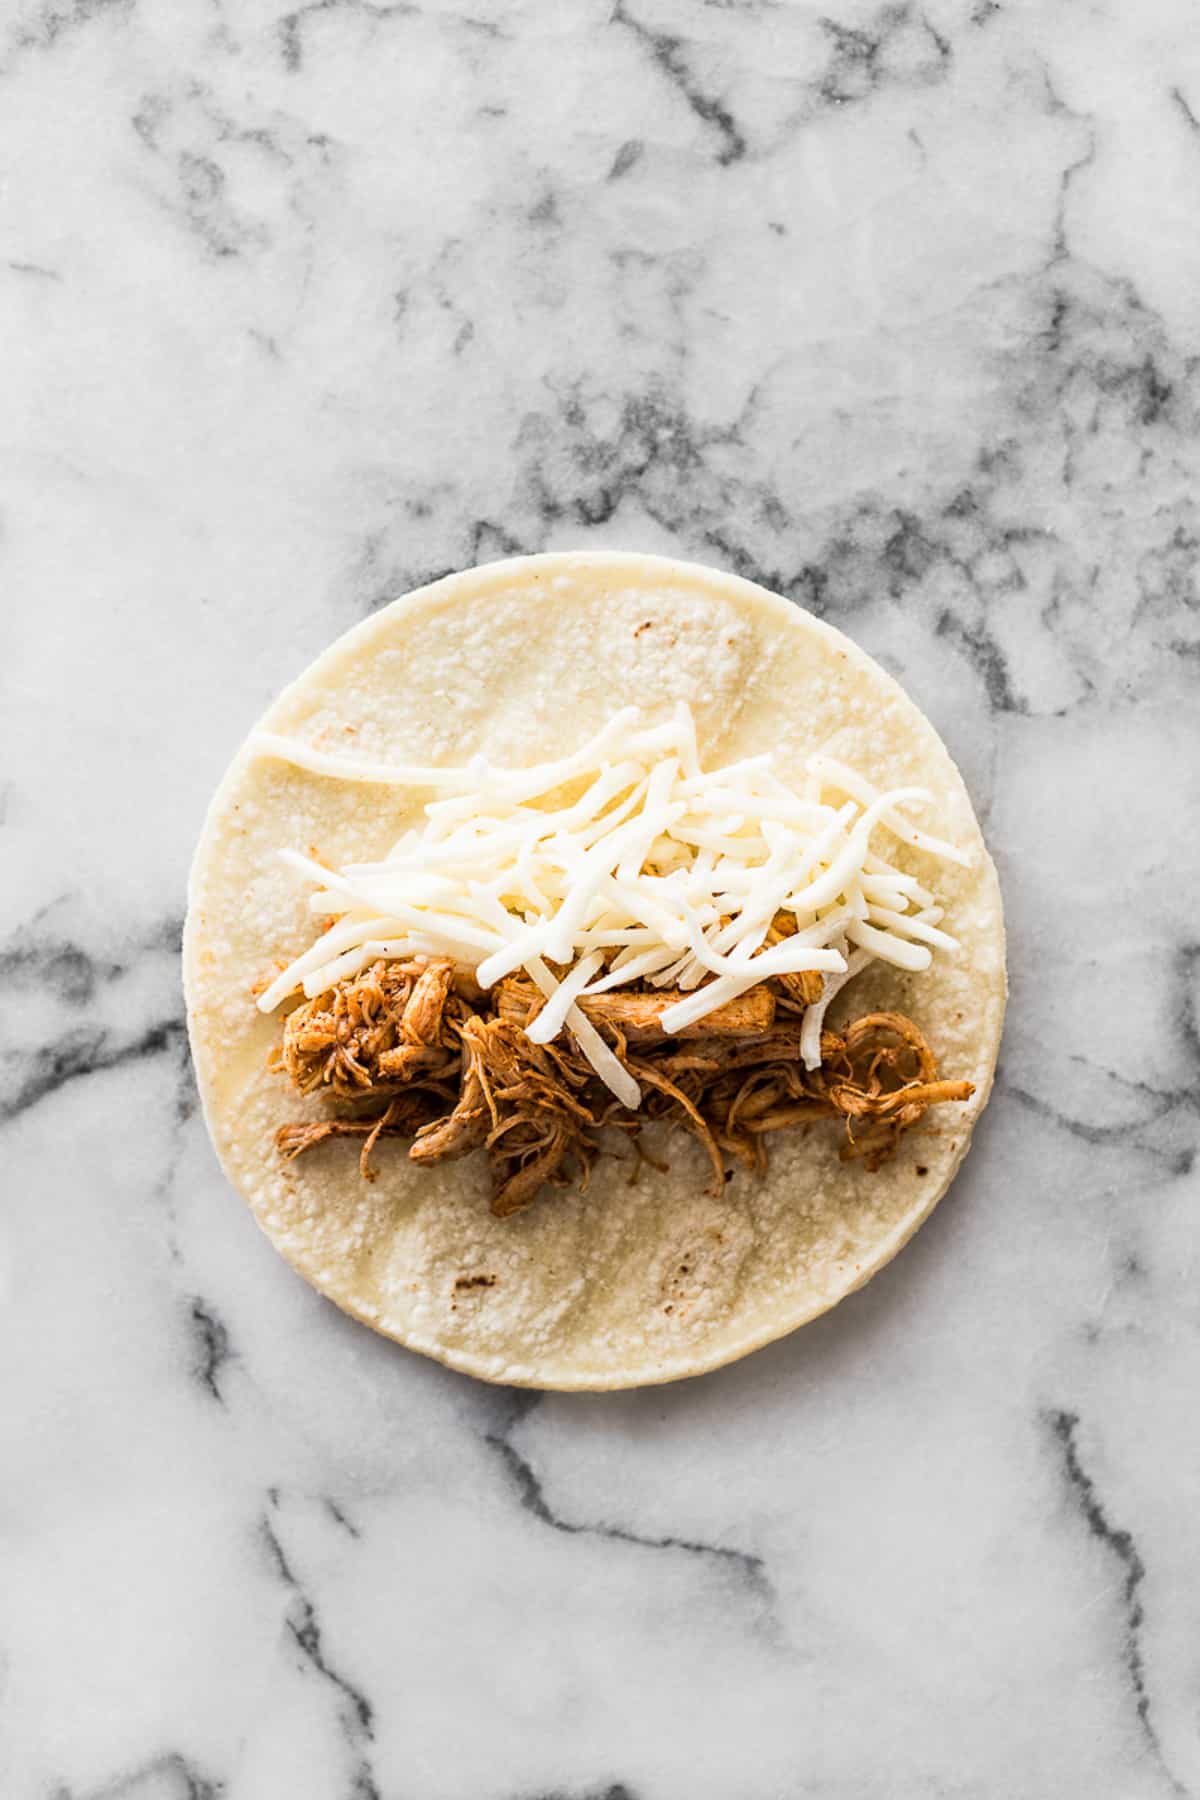 A corn tortilla with shredded cheese and shredded chicken in the middle.